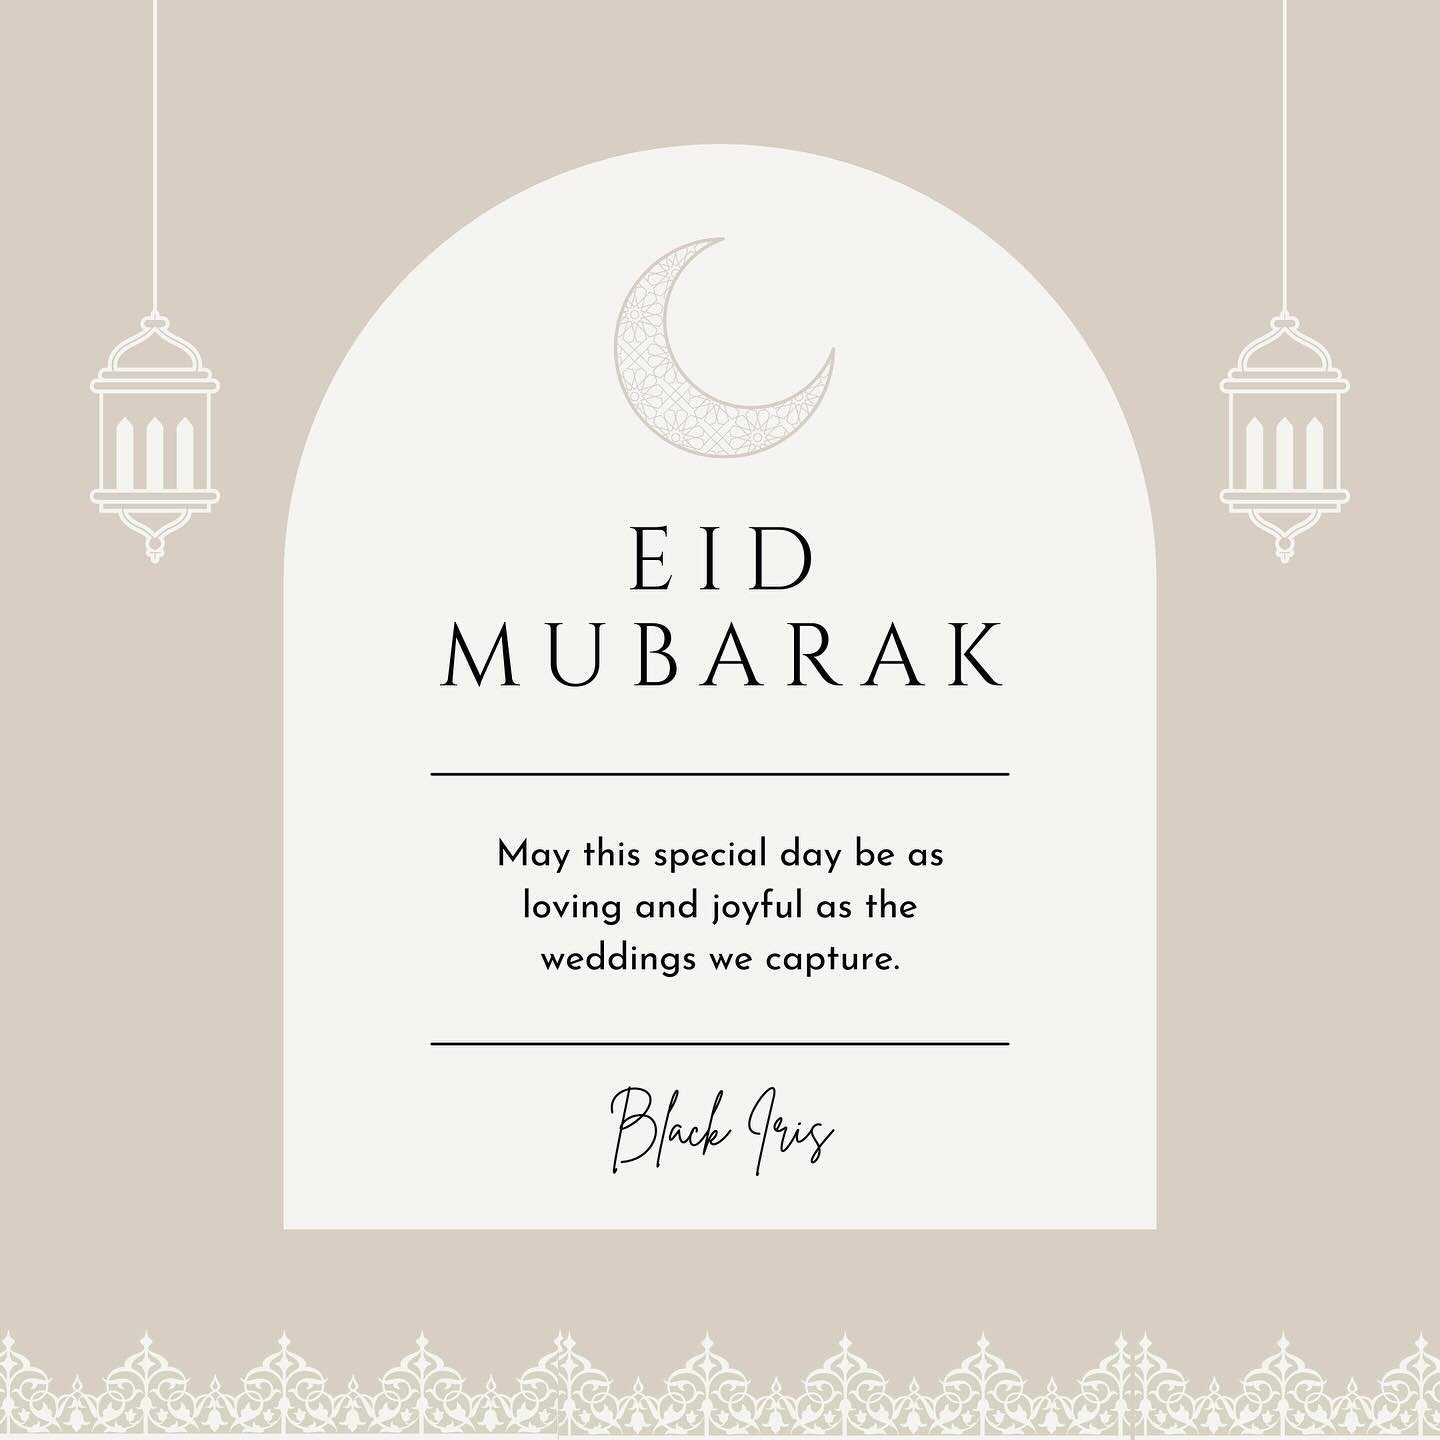 Eid Mubarak to our wonderful community! 🌙 Gaza, you are in our hearts on this day 🍉 Swipe for an announcement ✊🏽

Donations will be going to Palestinian Children&rsquo;s Relief Fund and Operation Olive Branch family rescues. We encourage all to co